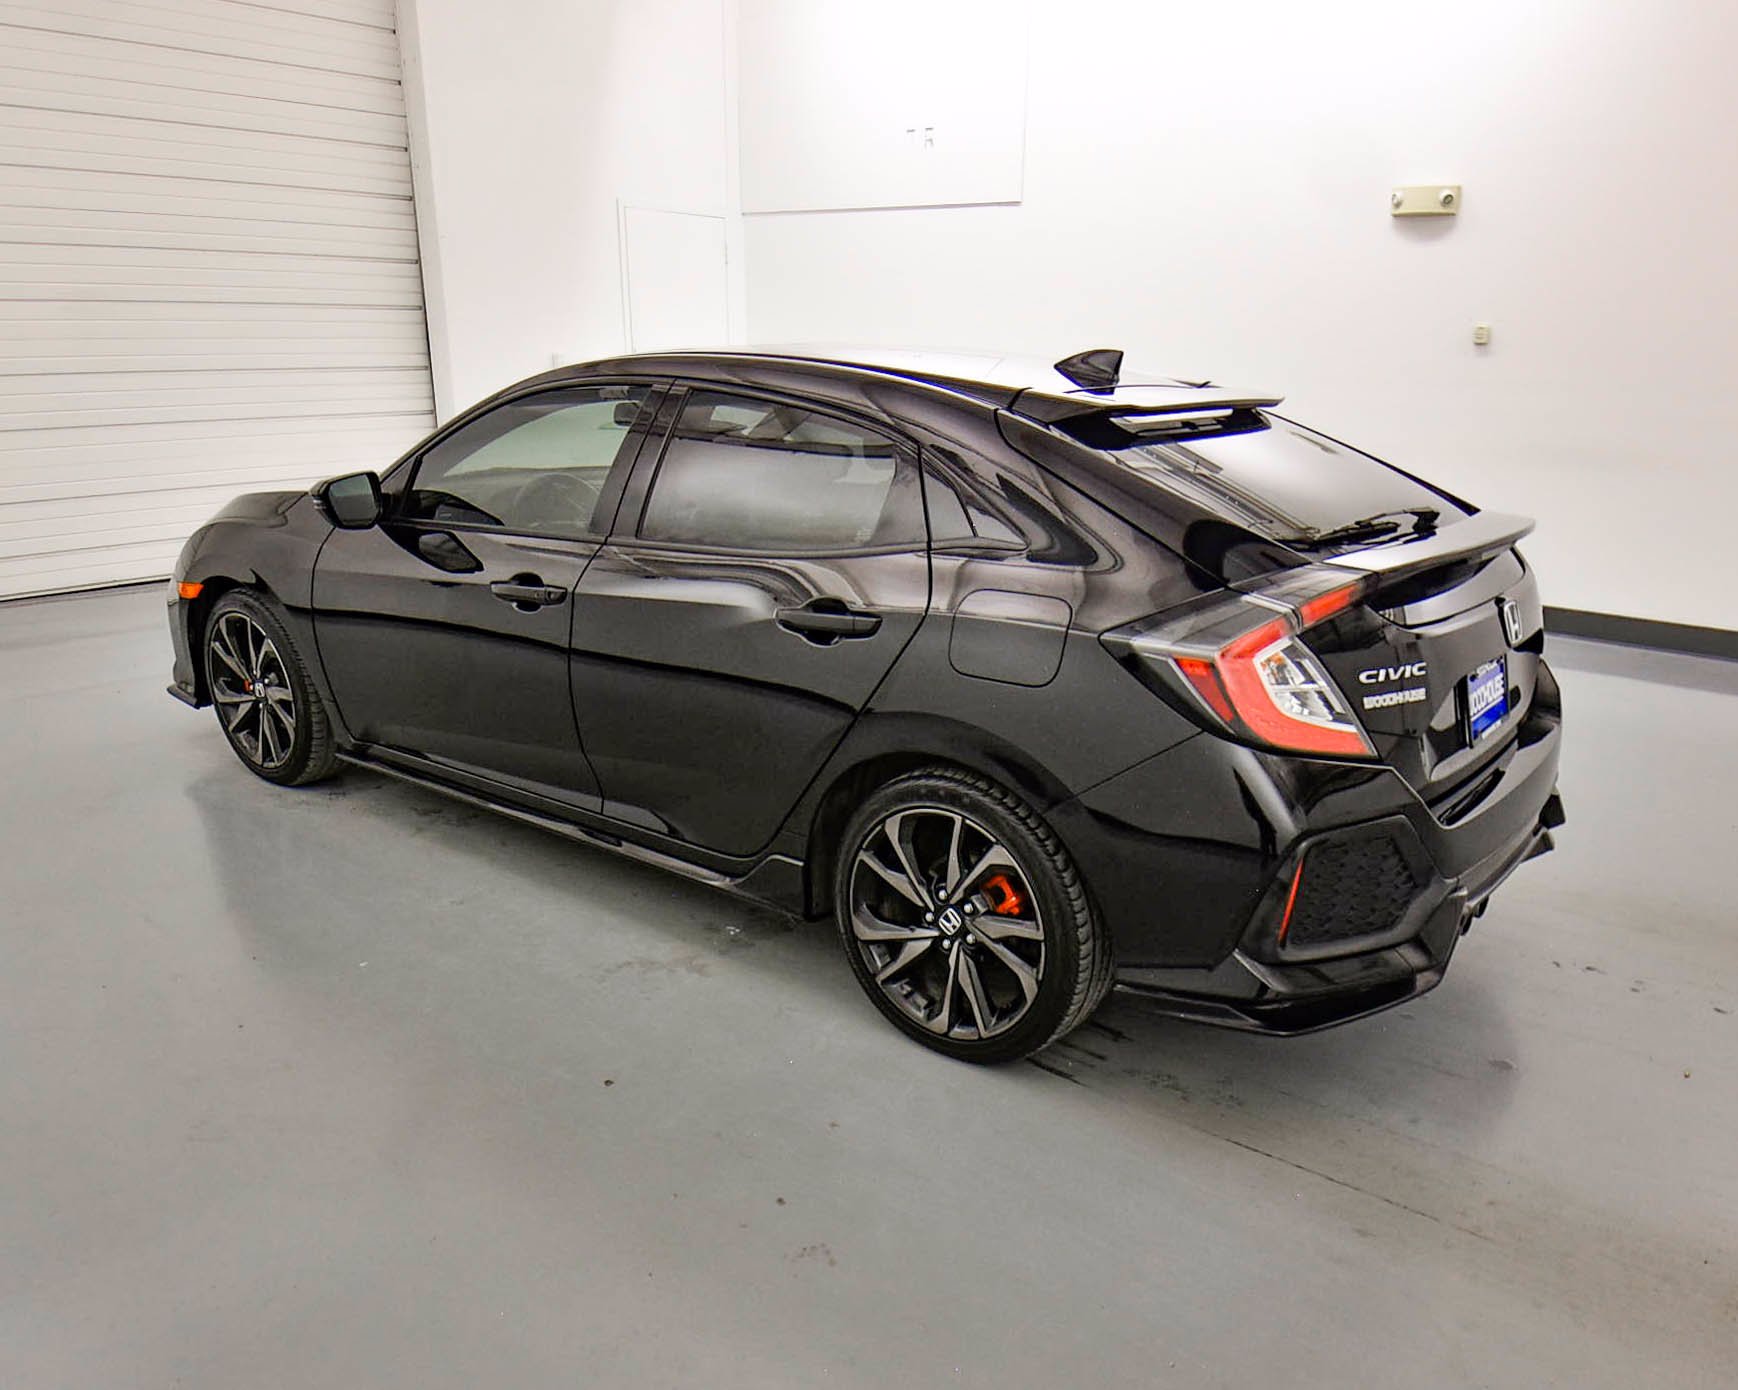 Pre-Owned 2017 Honda Civic Hatchback Sport Touring With Navigation